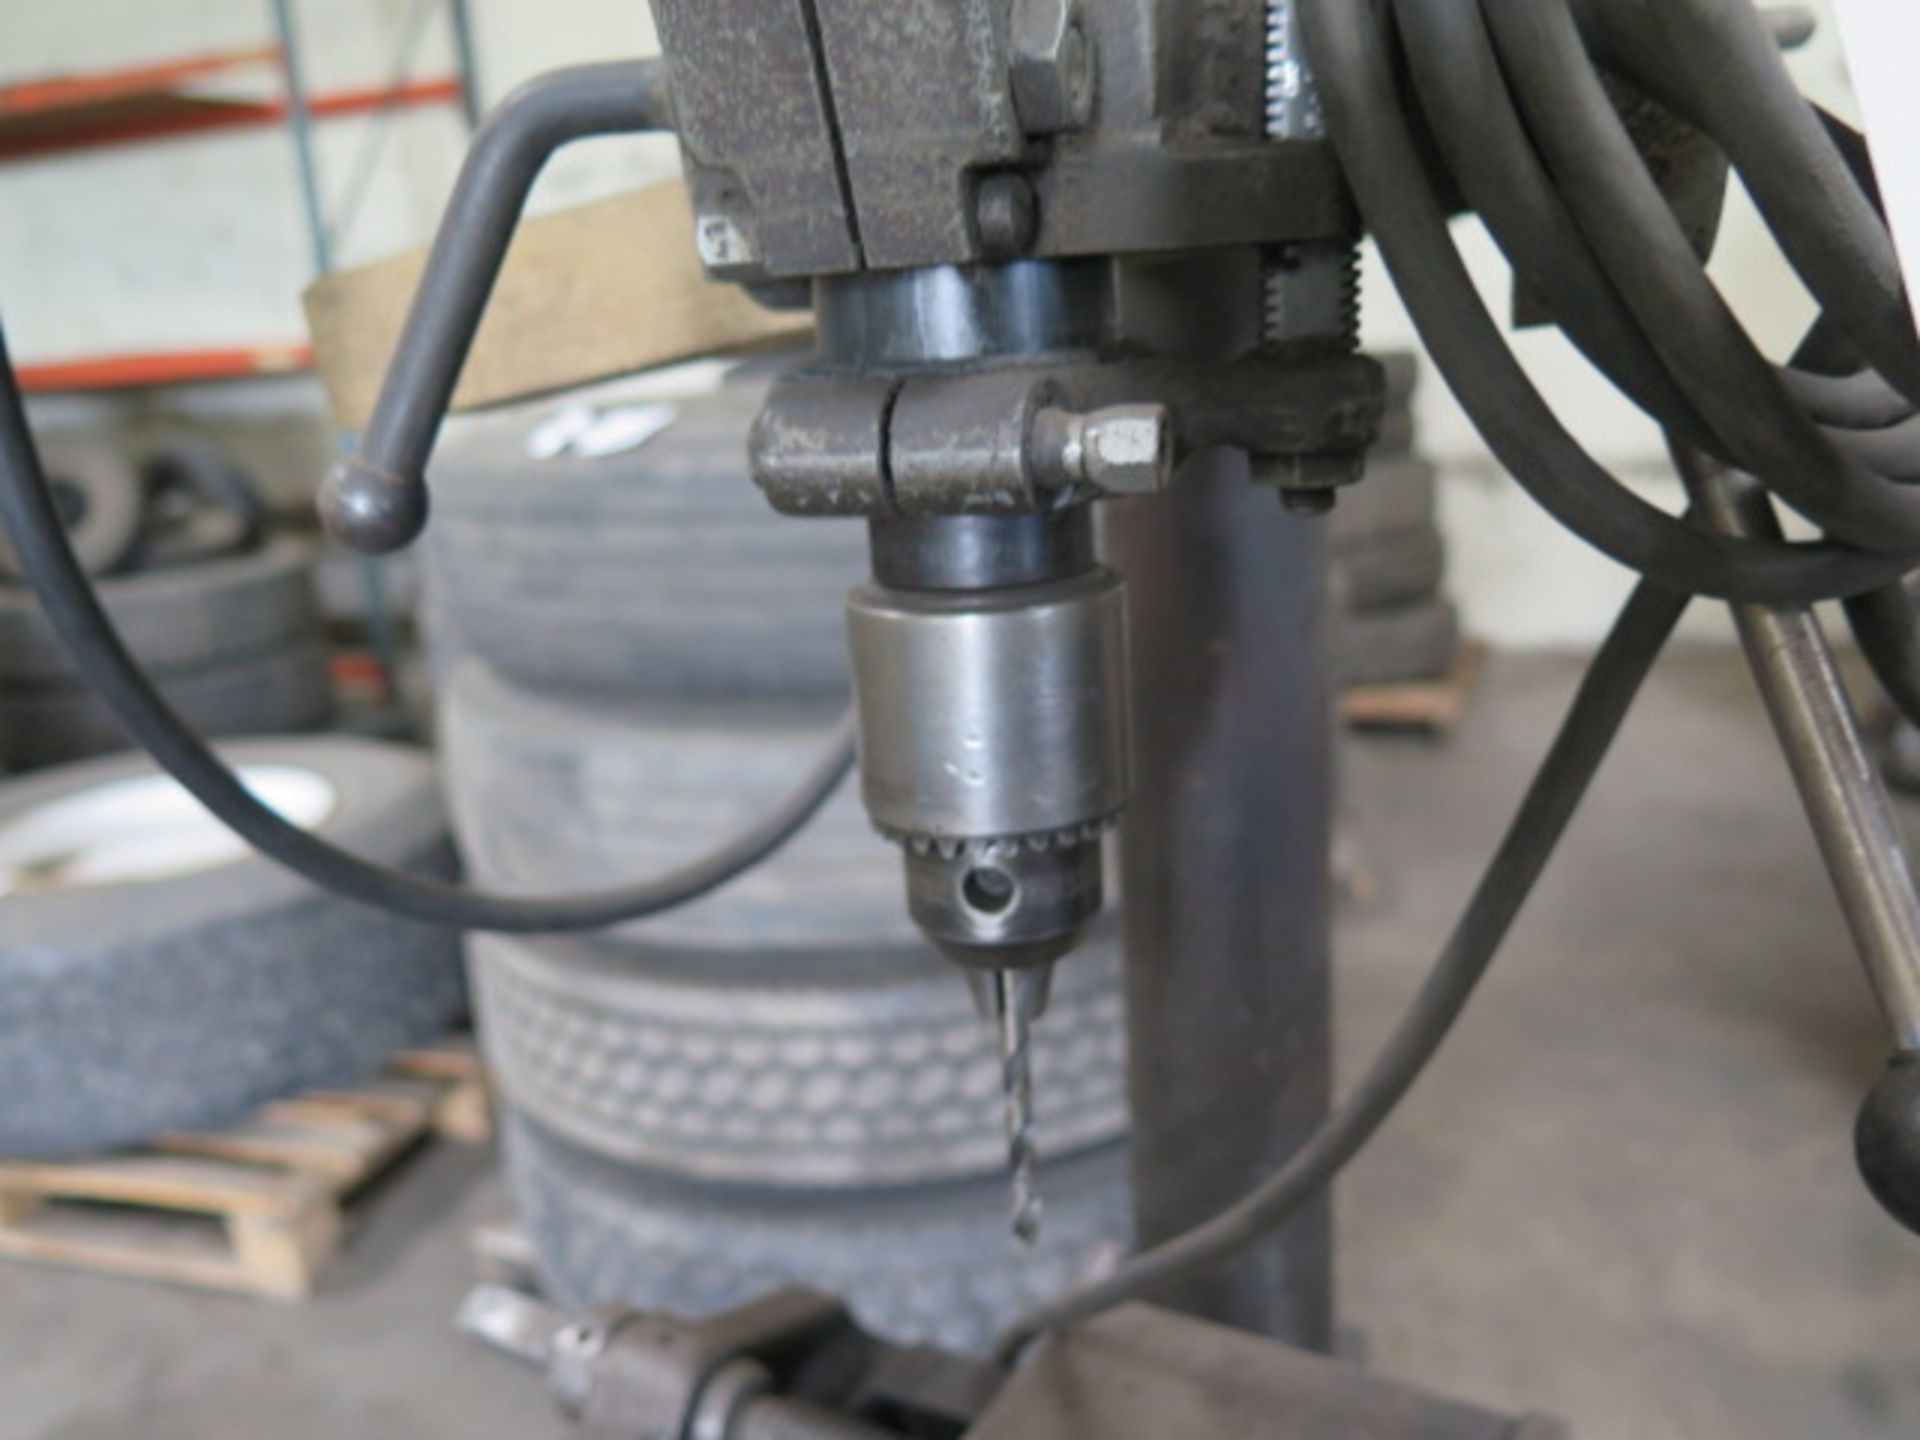 Rockwell Variable Speed Pedestal Drill Press (SOLD AS-IS - NO WARRANTY) - Image 6 of 8